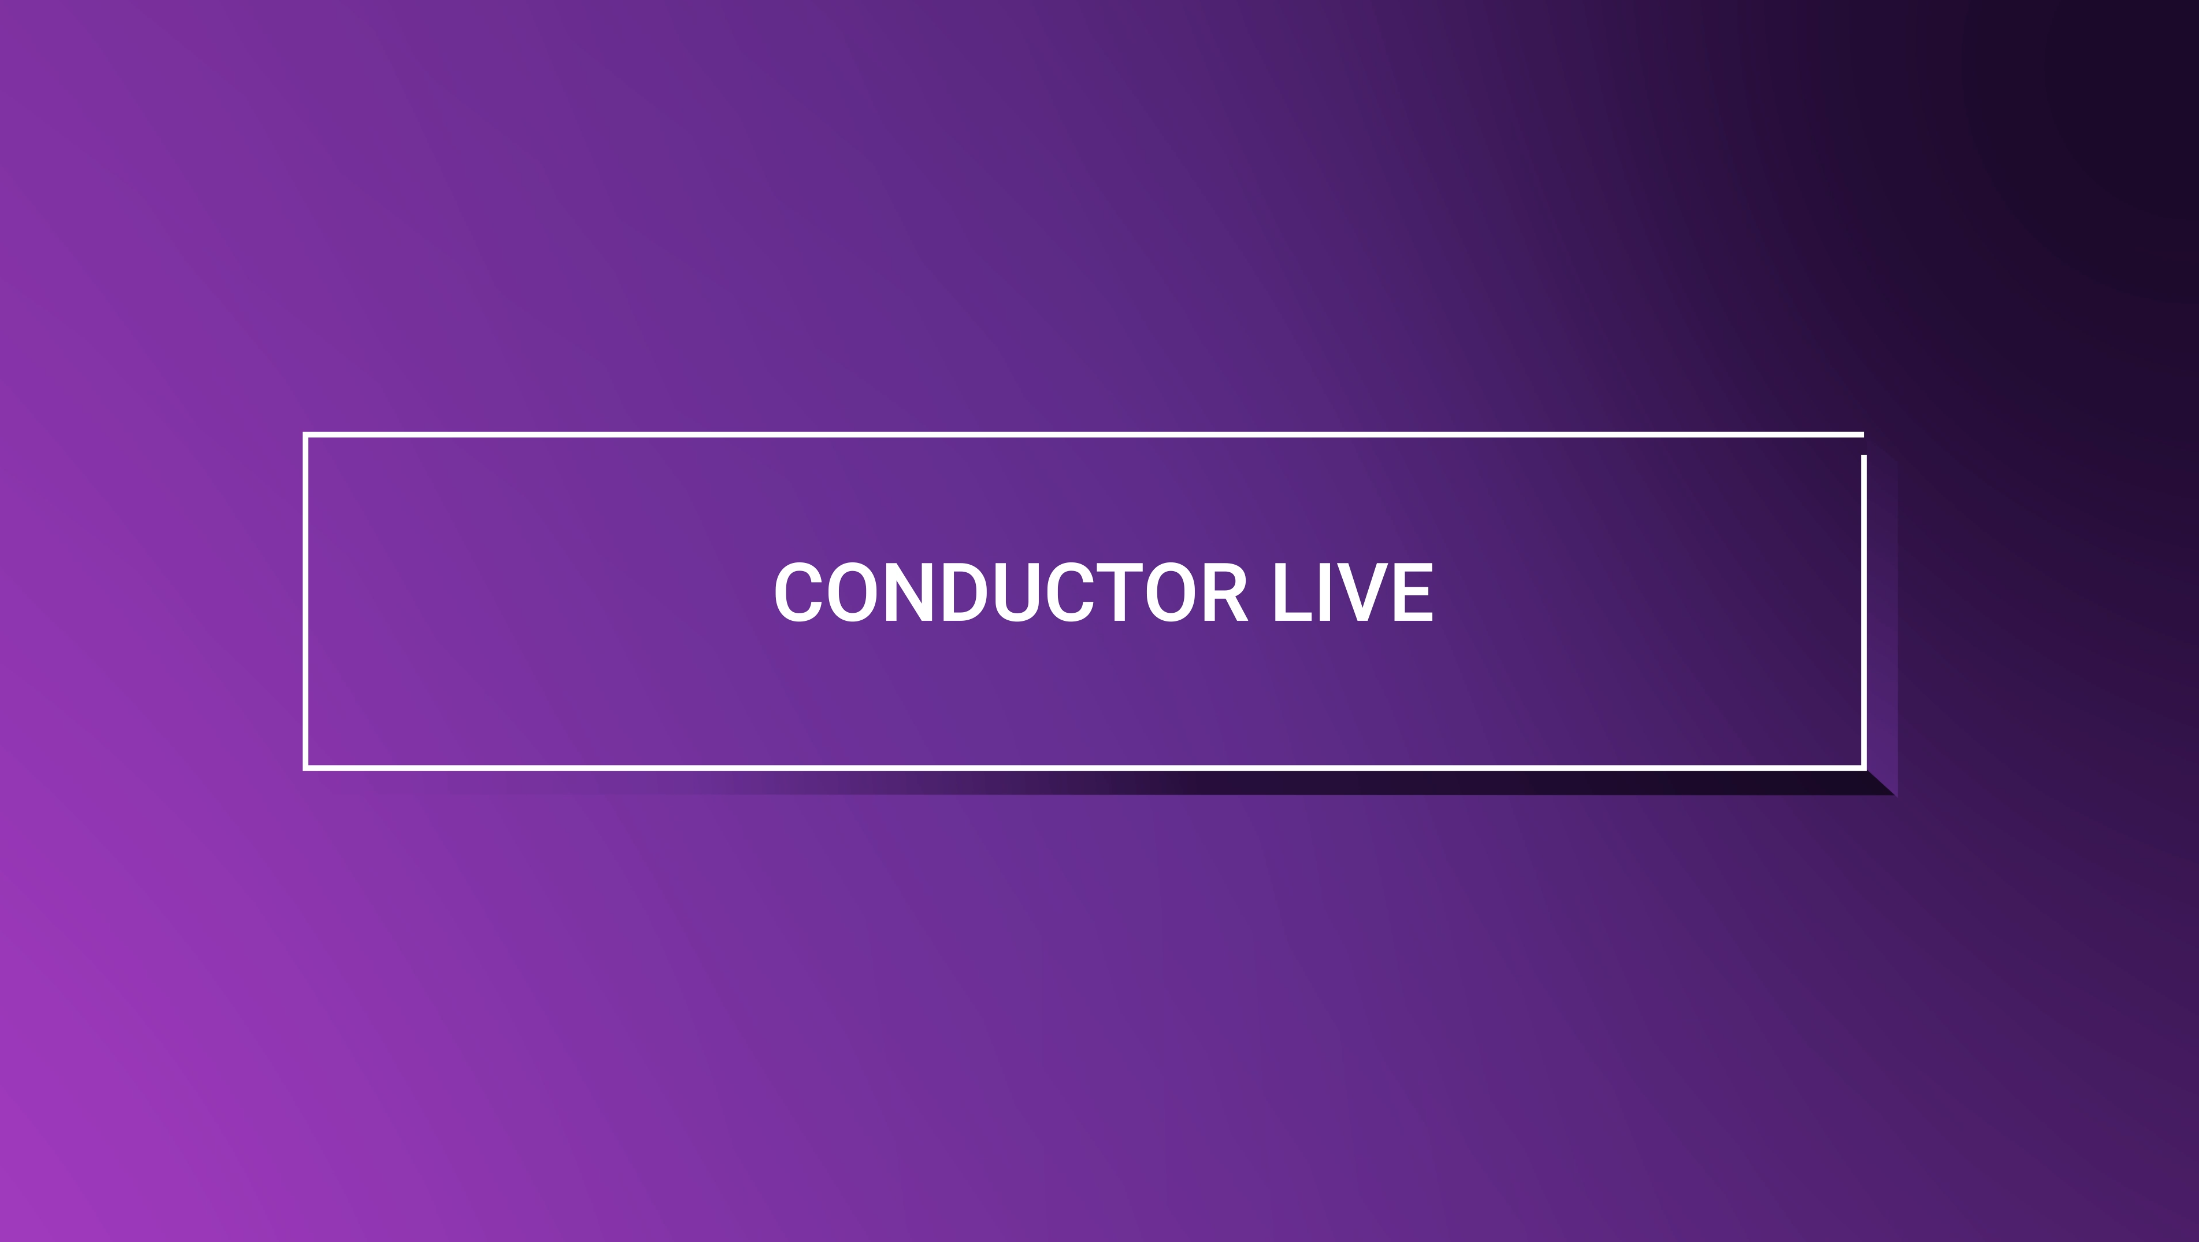 Conductor Live Video Poster